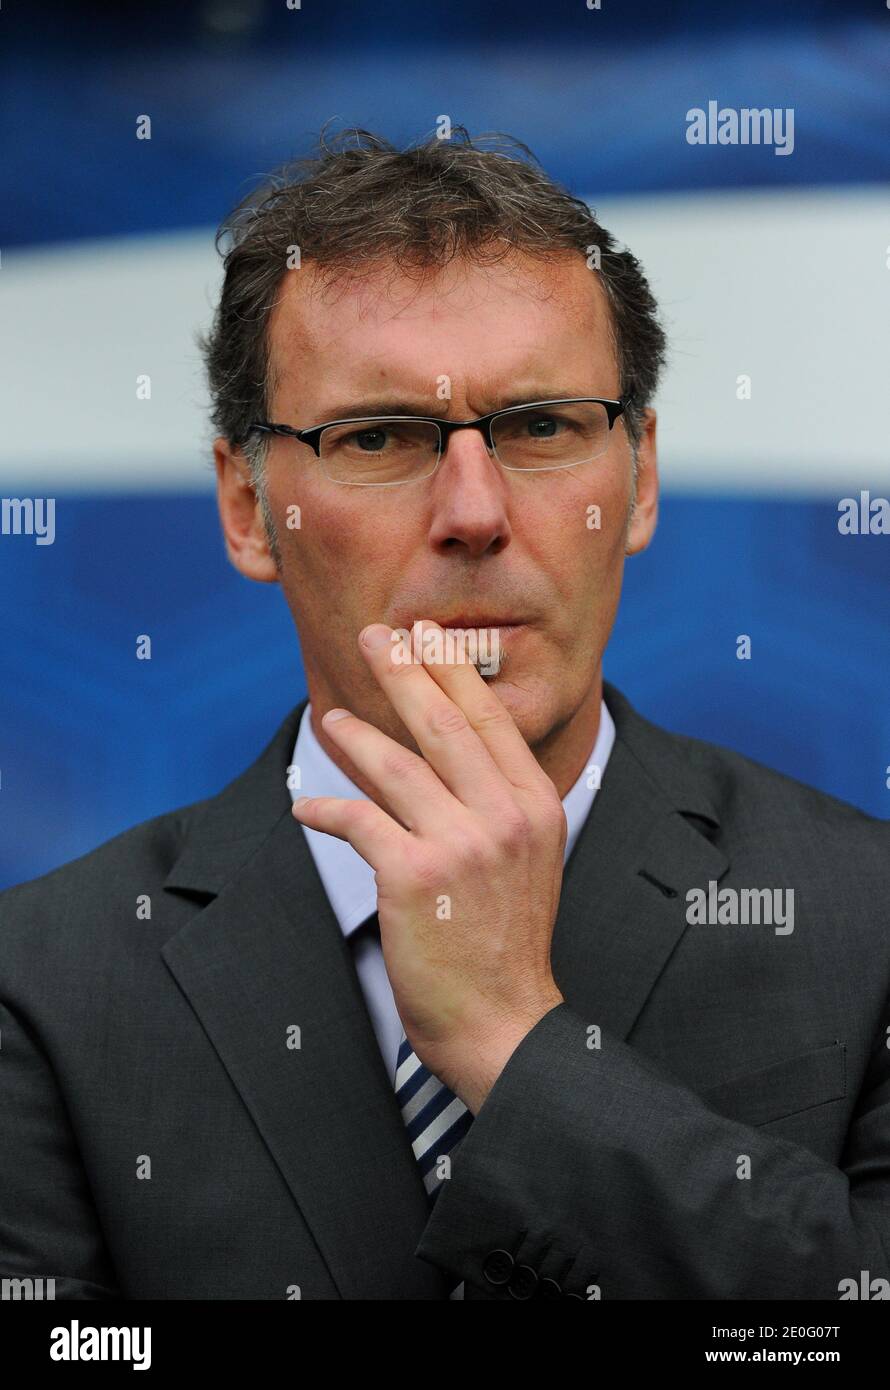 France's coach Laurent Blanc during an International Friendly soccer match, France Vs Estonia at MMArena stadium in Le Mans, France, on June 5, 2012. France won 4-0. Photo by ABACAPRESS.COM Stock Photo